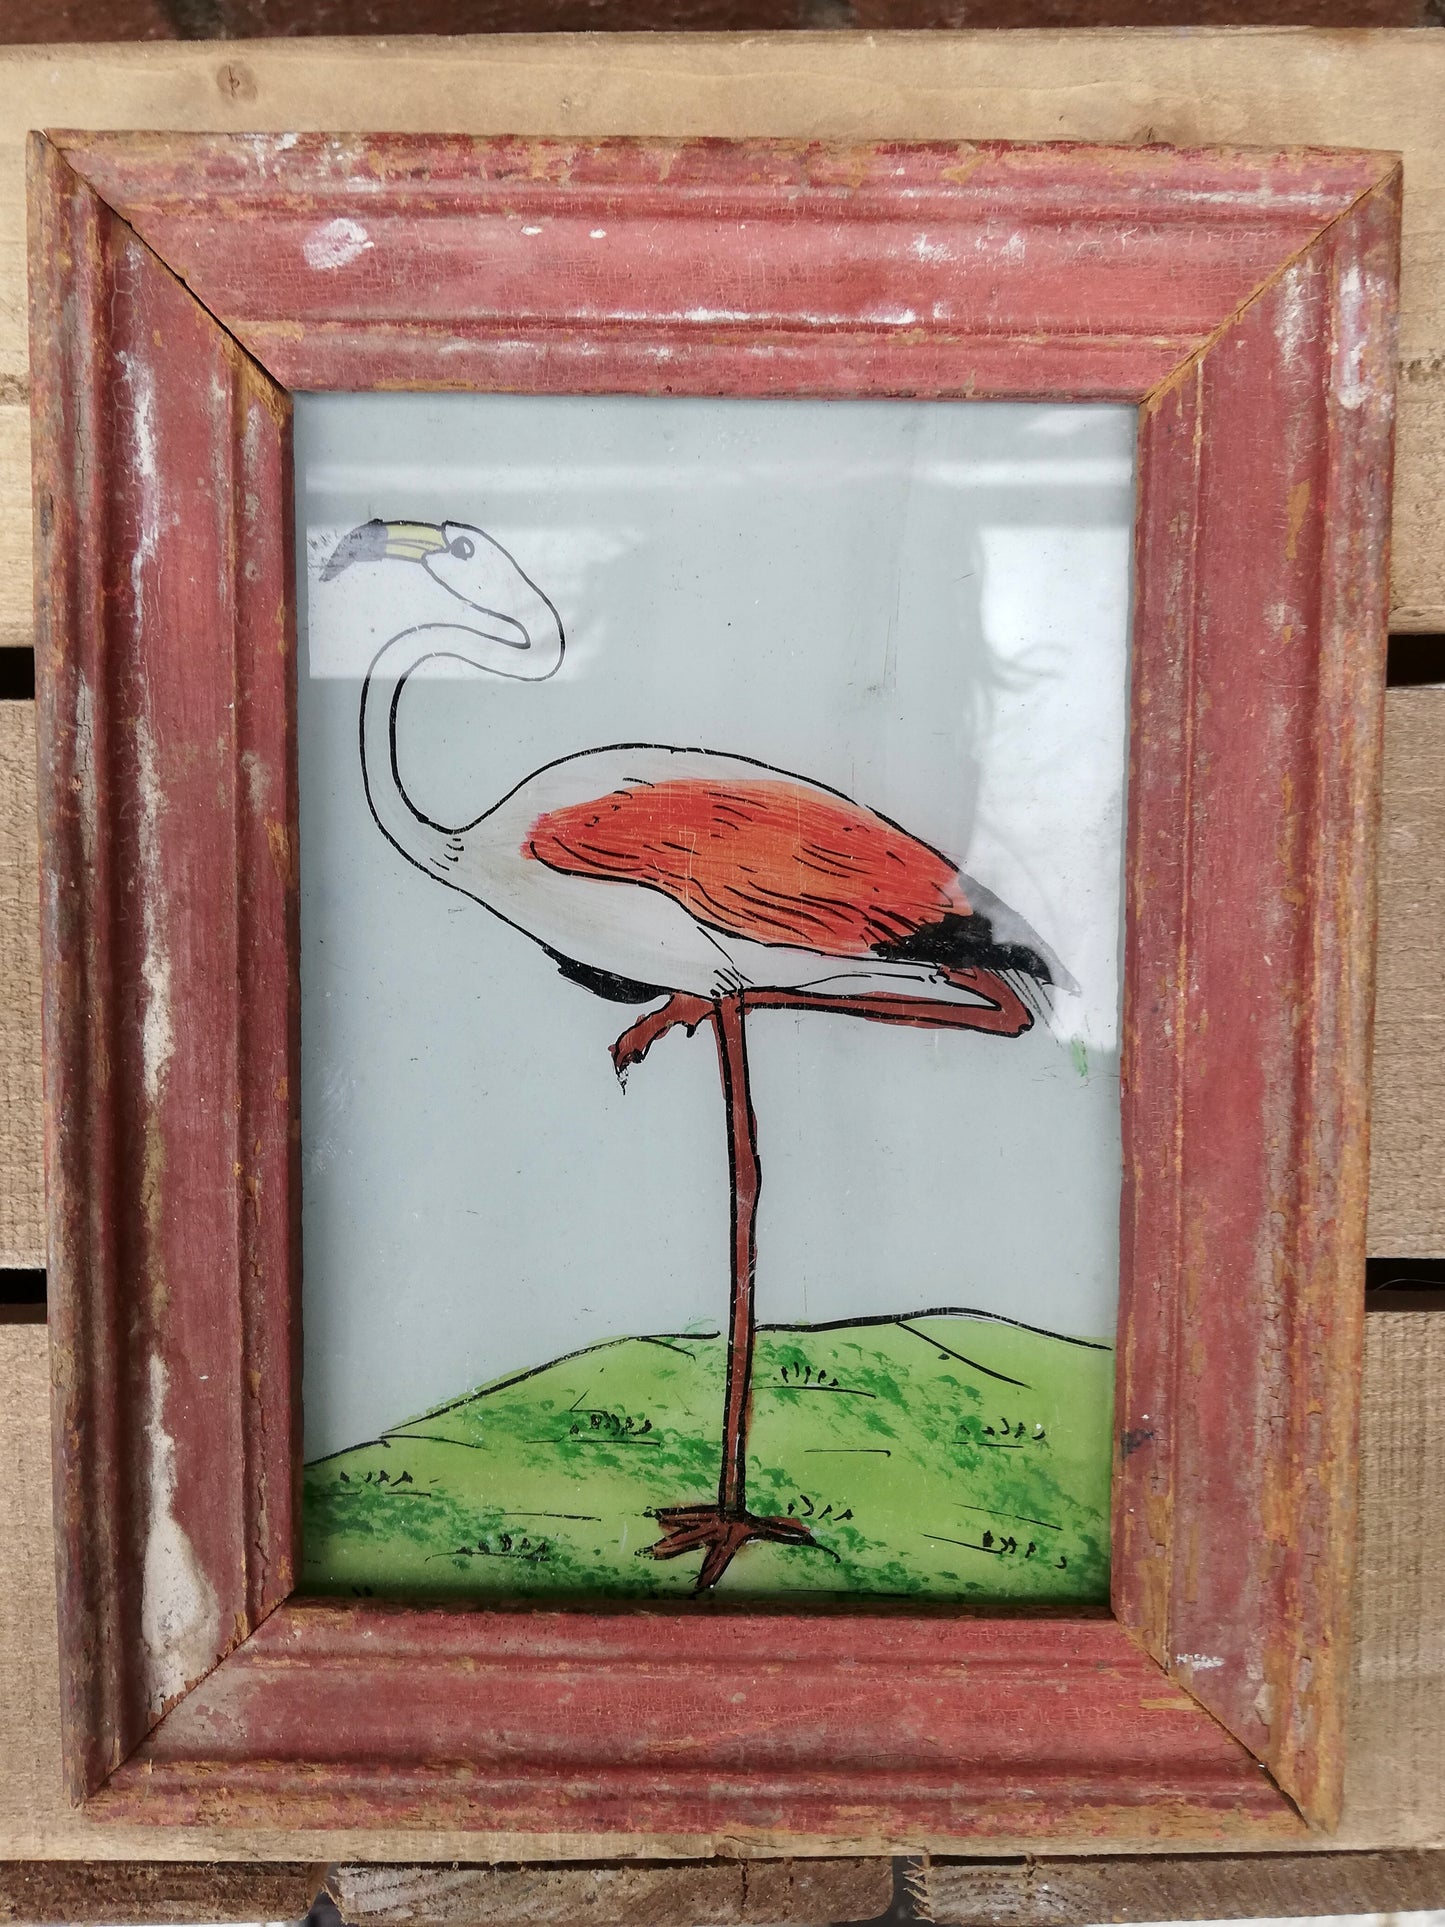 Vintage glass painting of a flamingo in a beautiful original frame